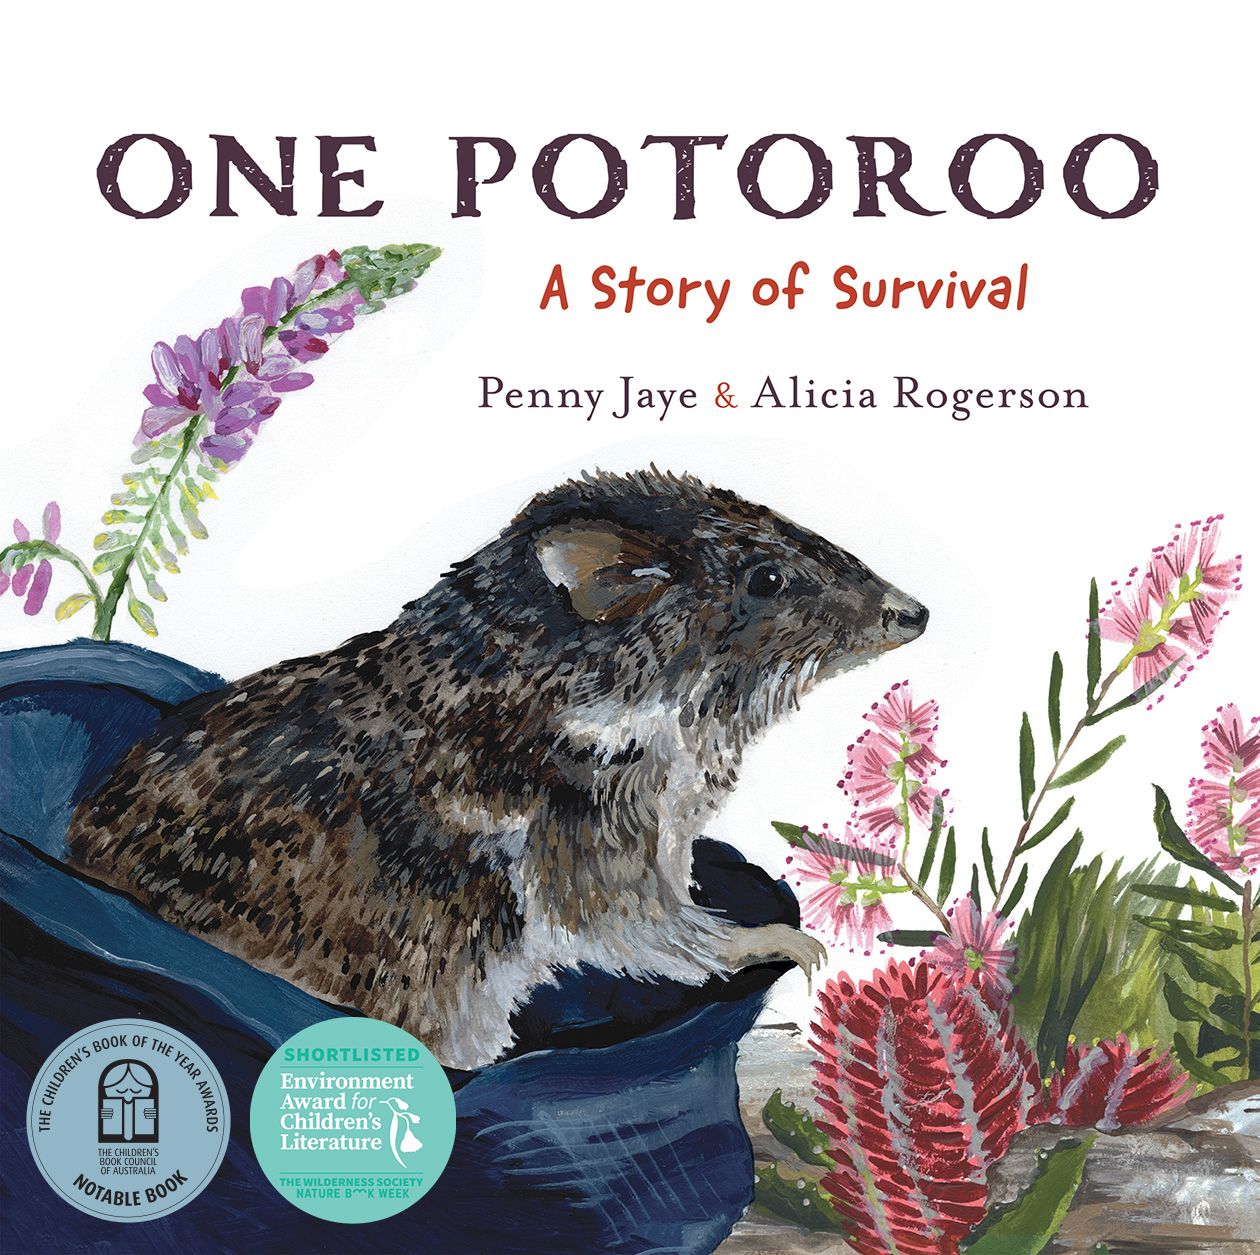 Cover of 'One Potoroo', featuring an illustration of a Gilbert's potoroo emerging from a cloth bag, surrounded by rocks and native plants on a white b